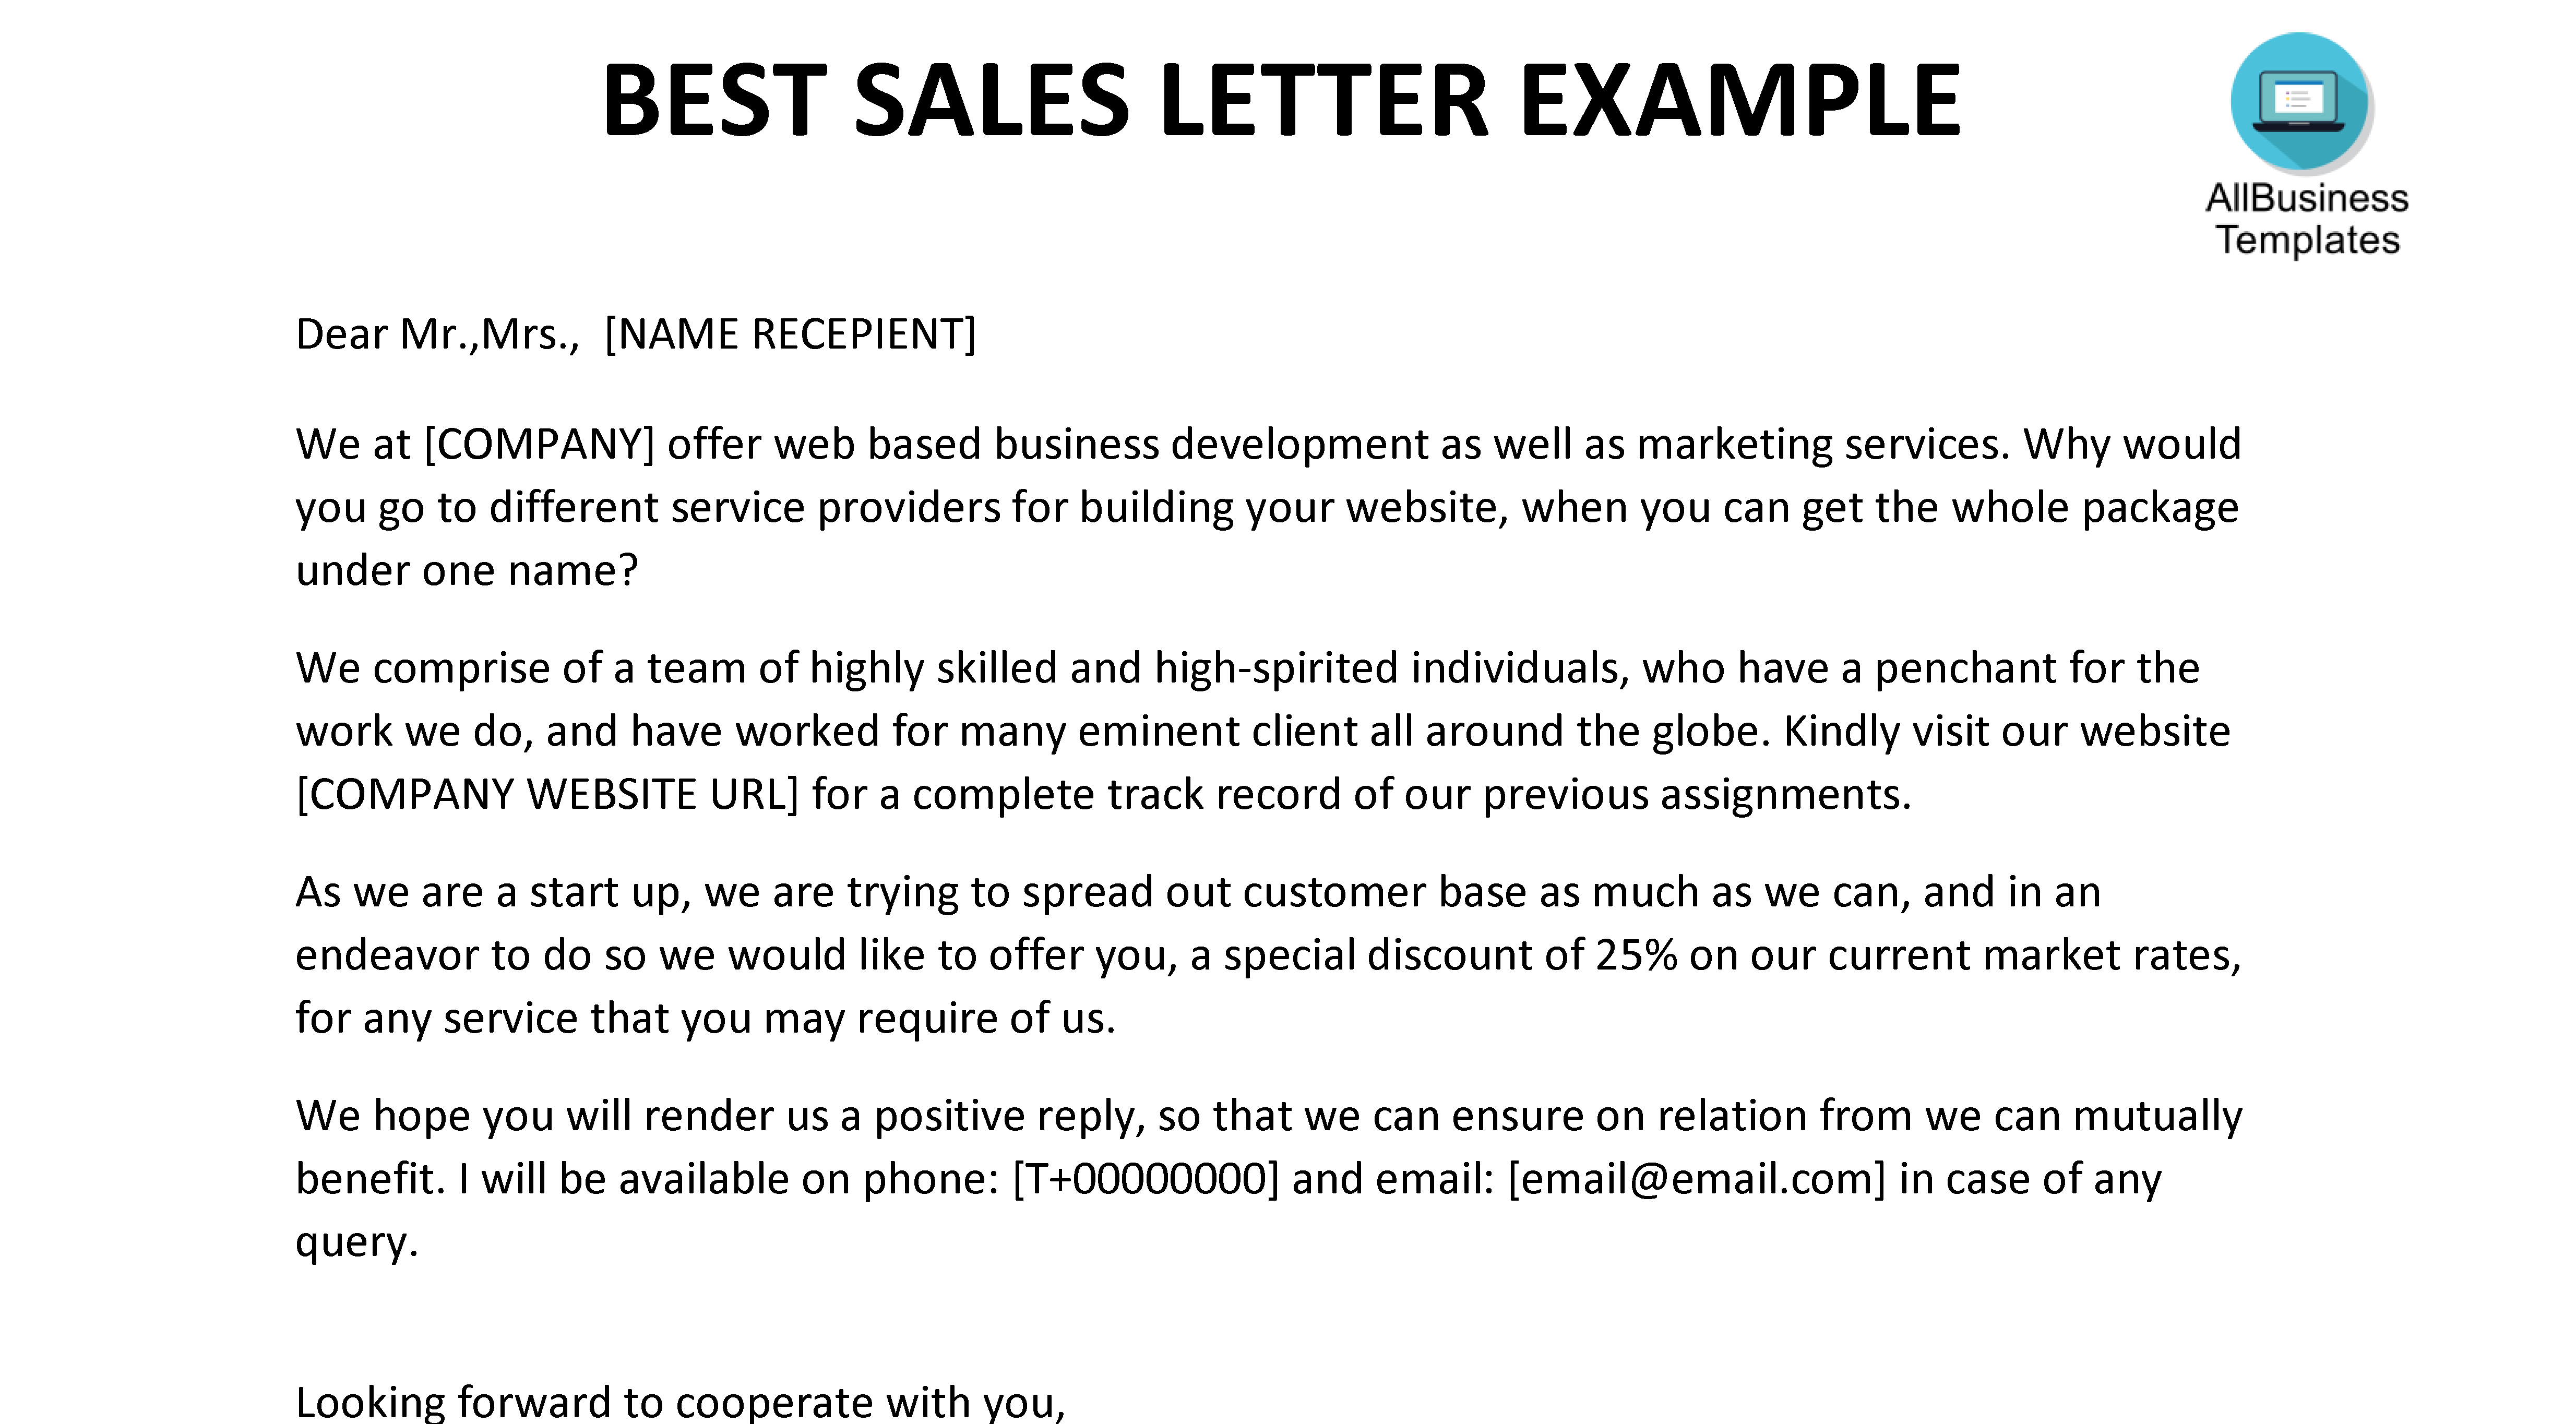 Free Sales Letter For Marketing Or Website Development Templates